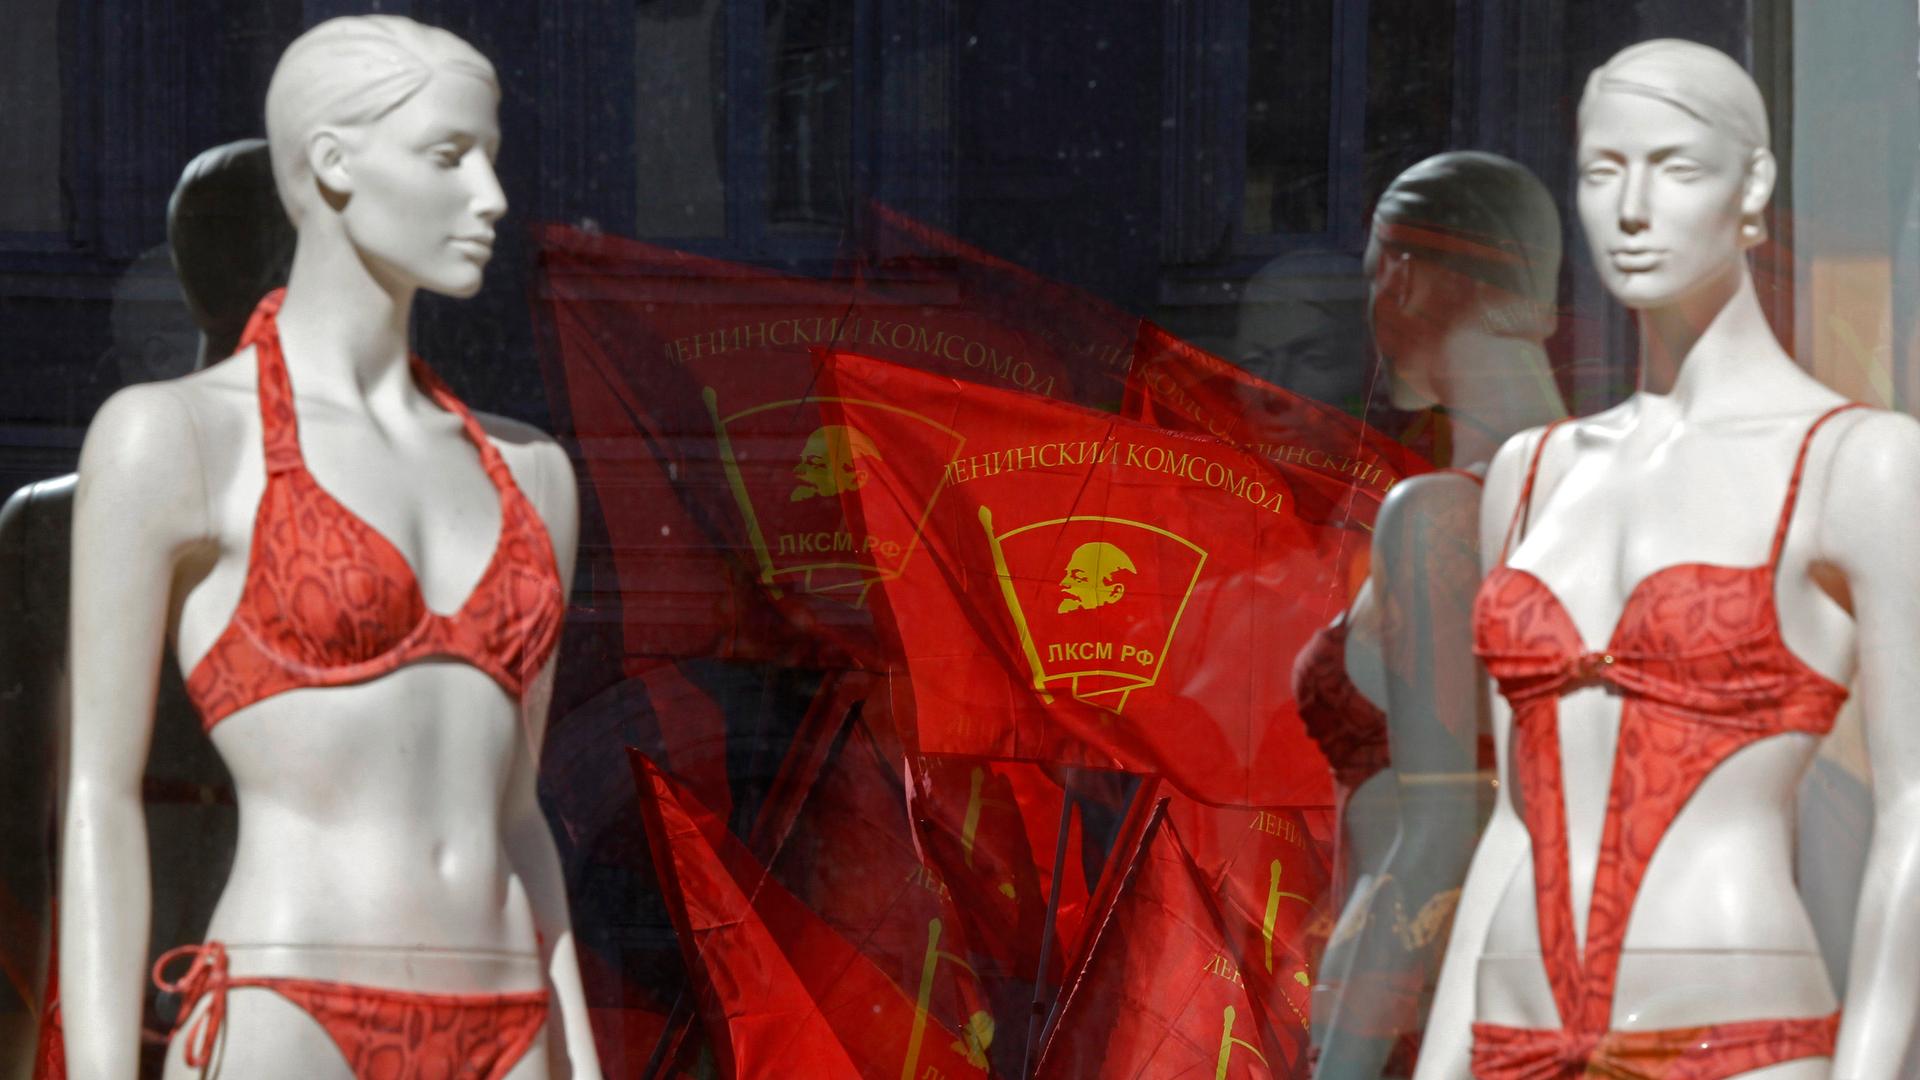 Communist flags are reflected in a lingerie shop window during a traditional Labor Day march in St. Petersburg in 2013.